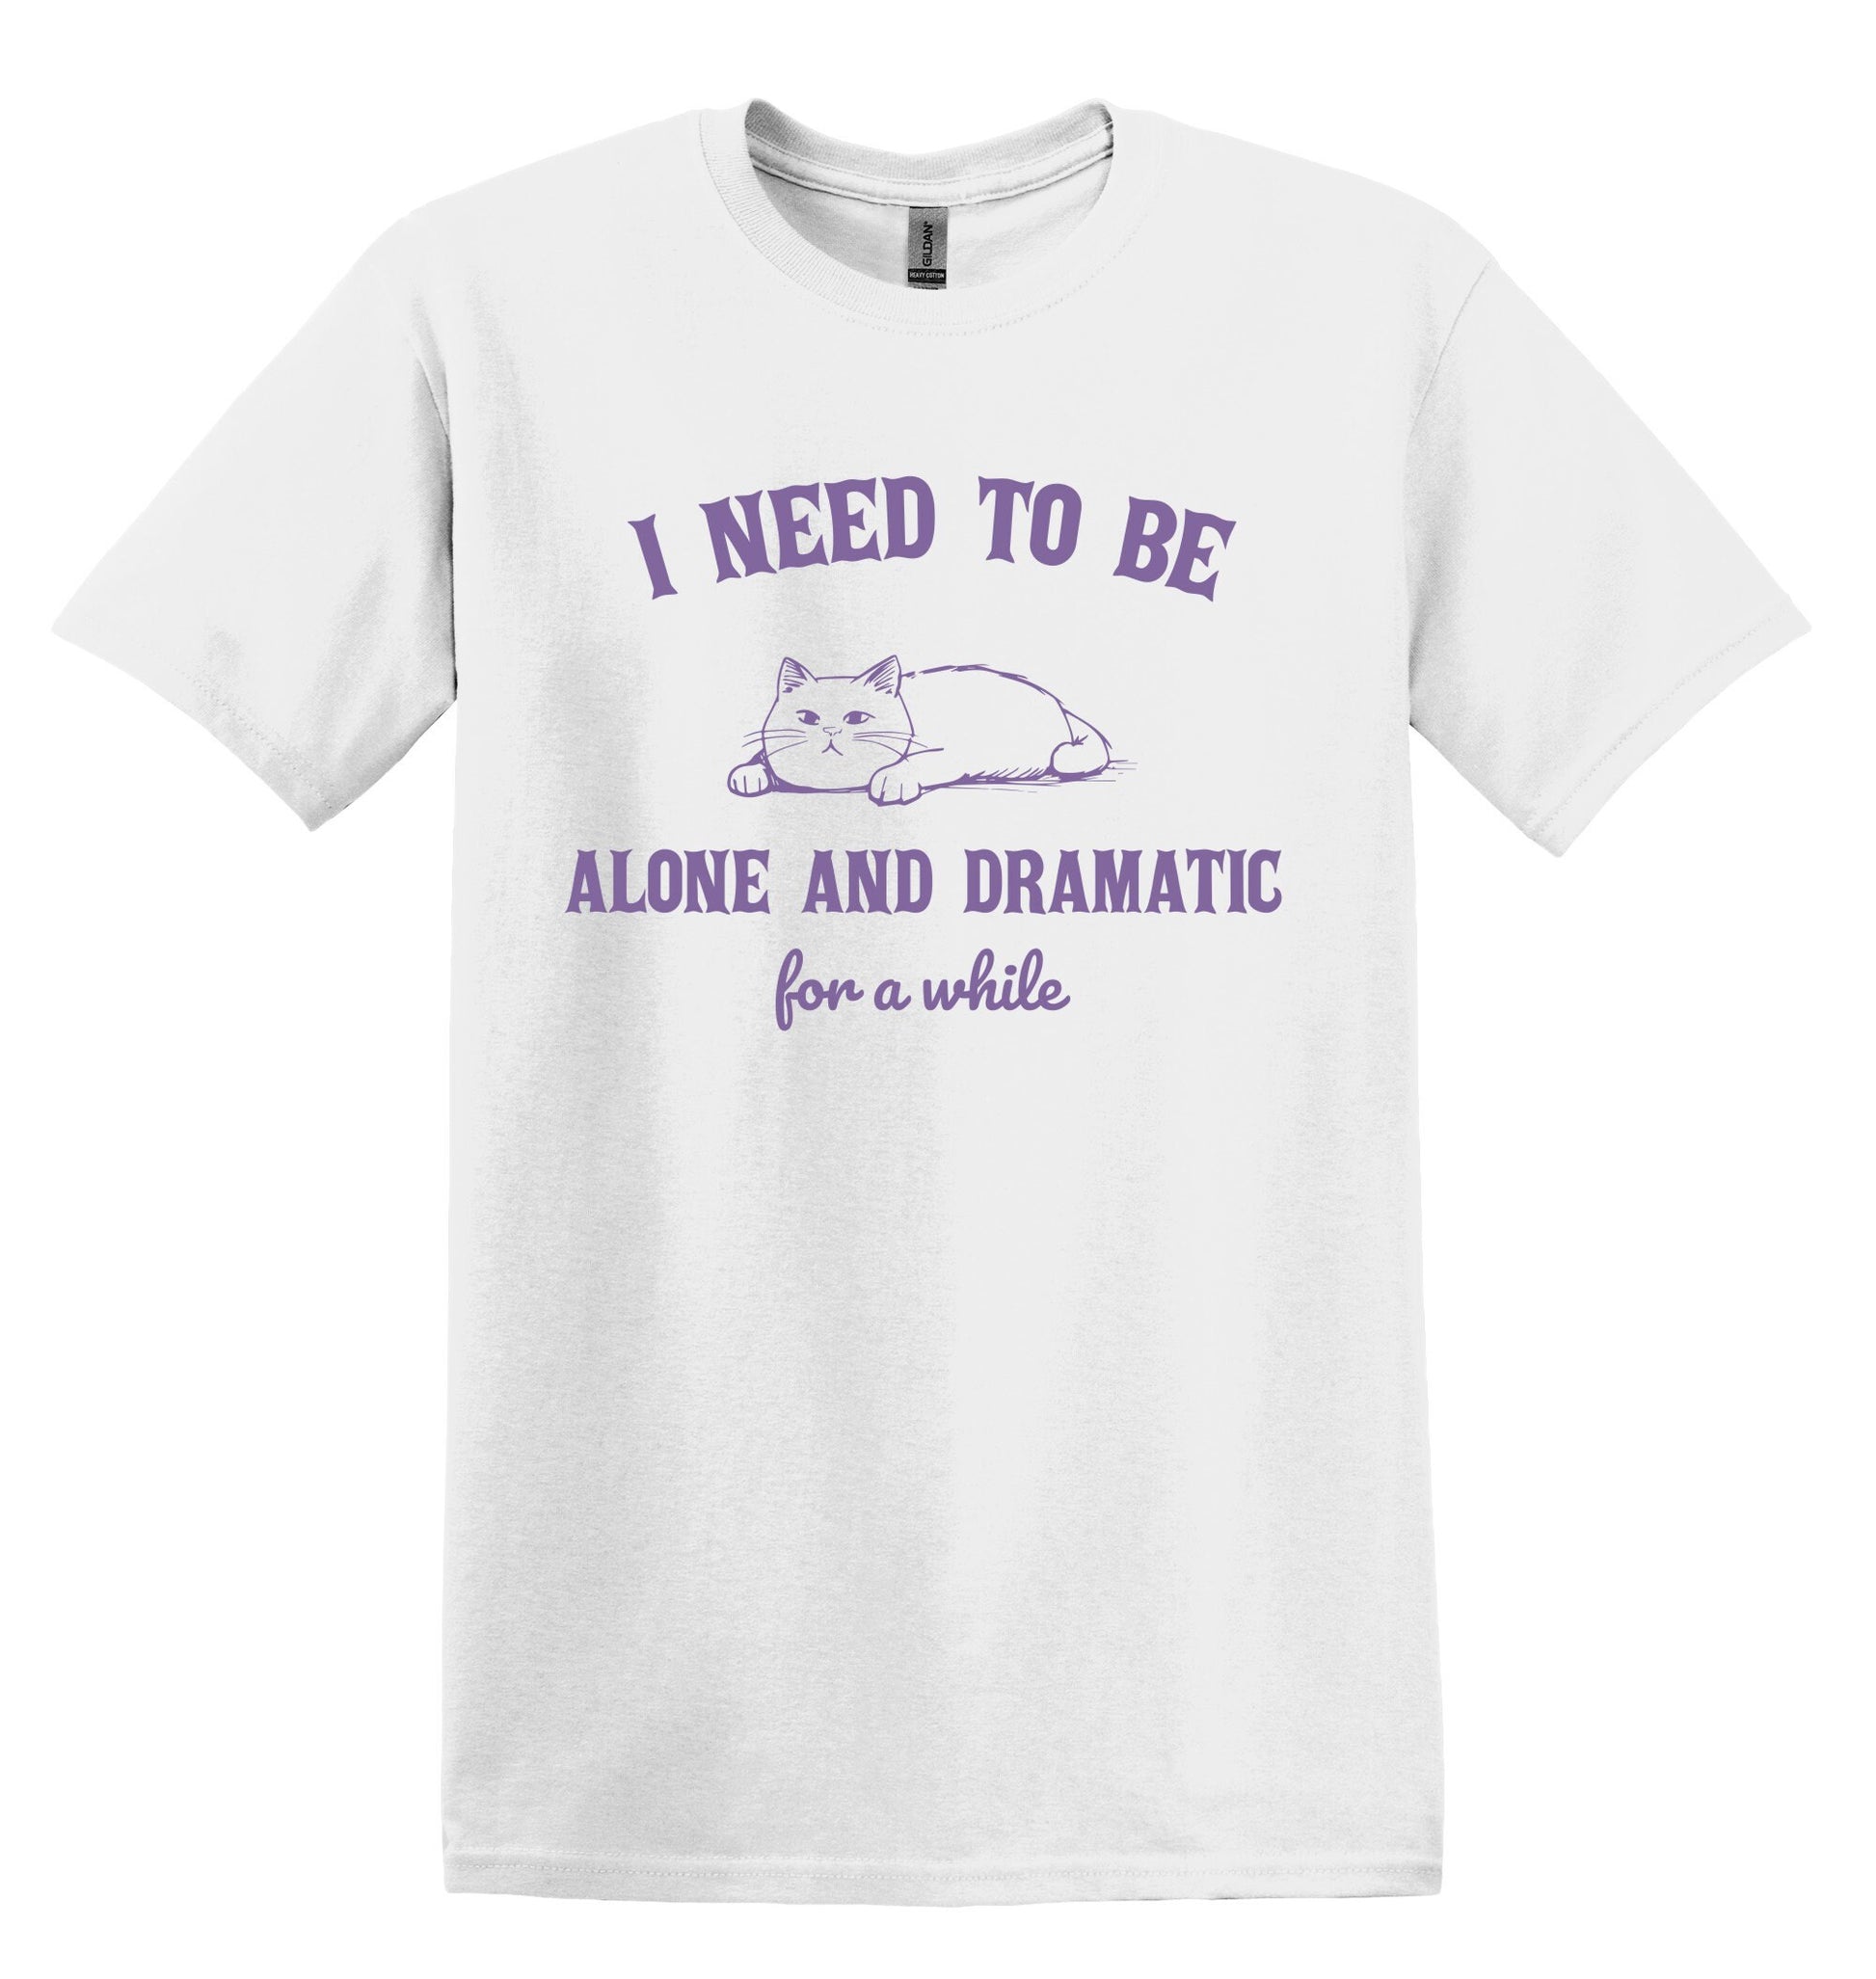 I Need to Be Alone and Dramatic for a While Cat Shirt Graphic Shirt Funny Shirt Vintage Funny TShirt Nostalgia T-Shirt Relaxed Cotton Shirt